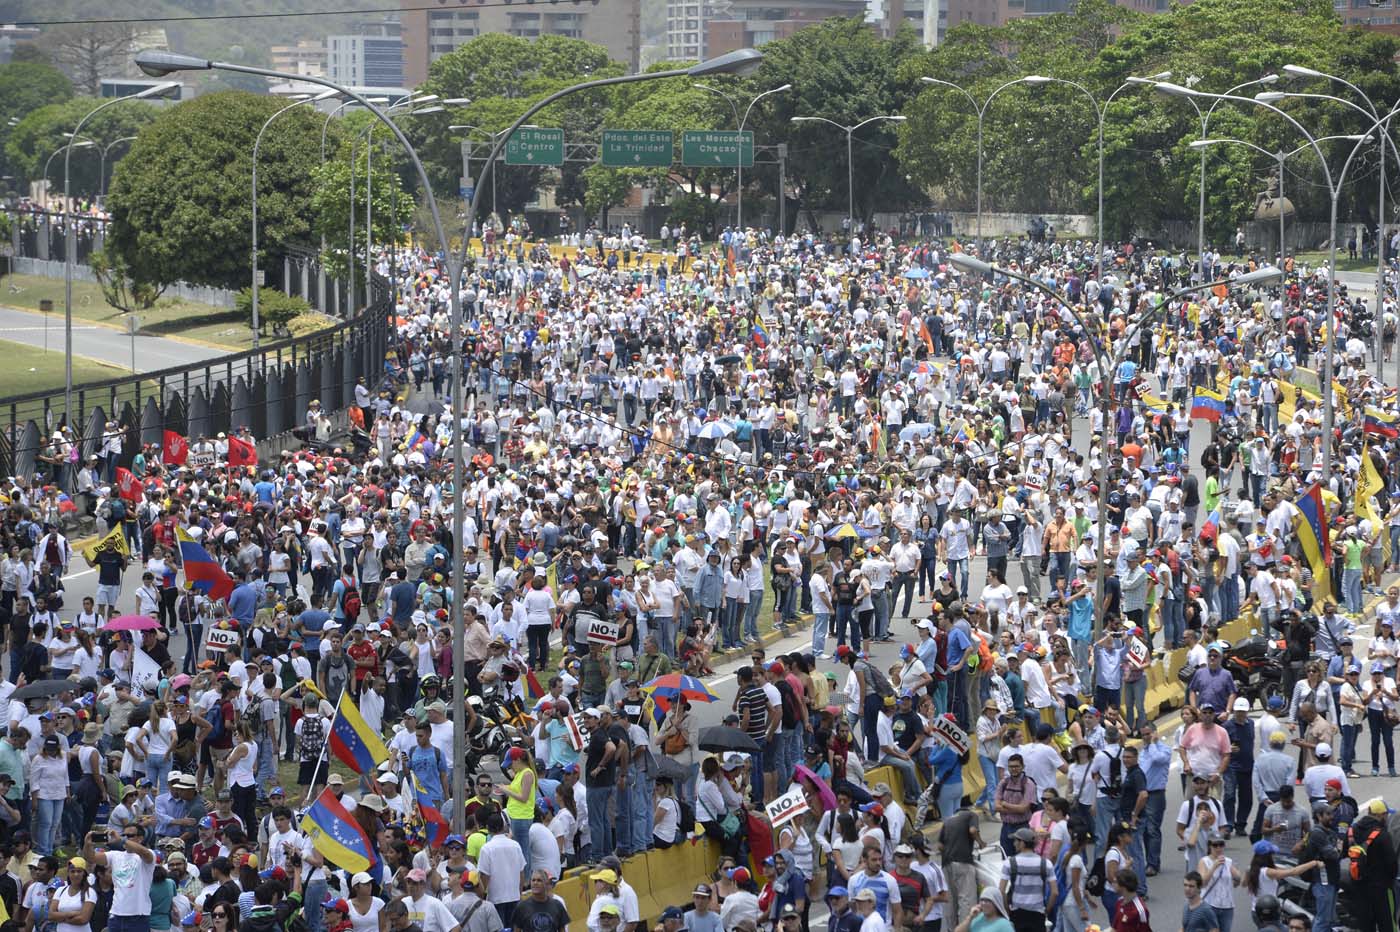 Venezuelan opposition activists gather to protest against the government of President Nicolas Maduro on April 6, 2017 in Caracas. The center-right opposition vowed fresh street protests -after earlier unrest left dozens of people injured - to increase pressure on Maduro, whom they blame for the country's economic crisis. / AFP PHOTO / FEDERICO PARRA